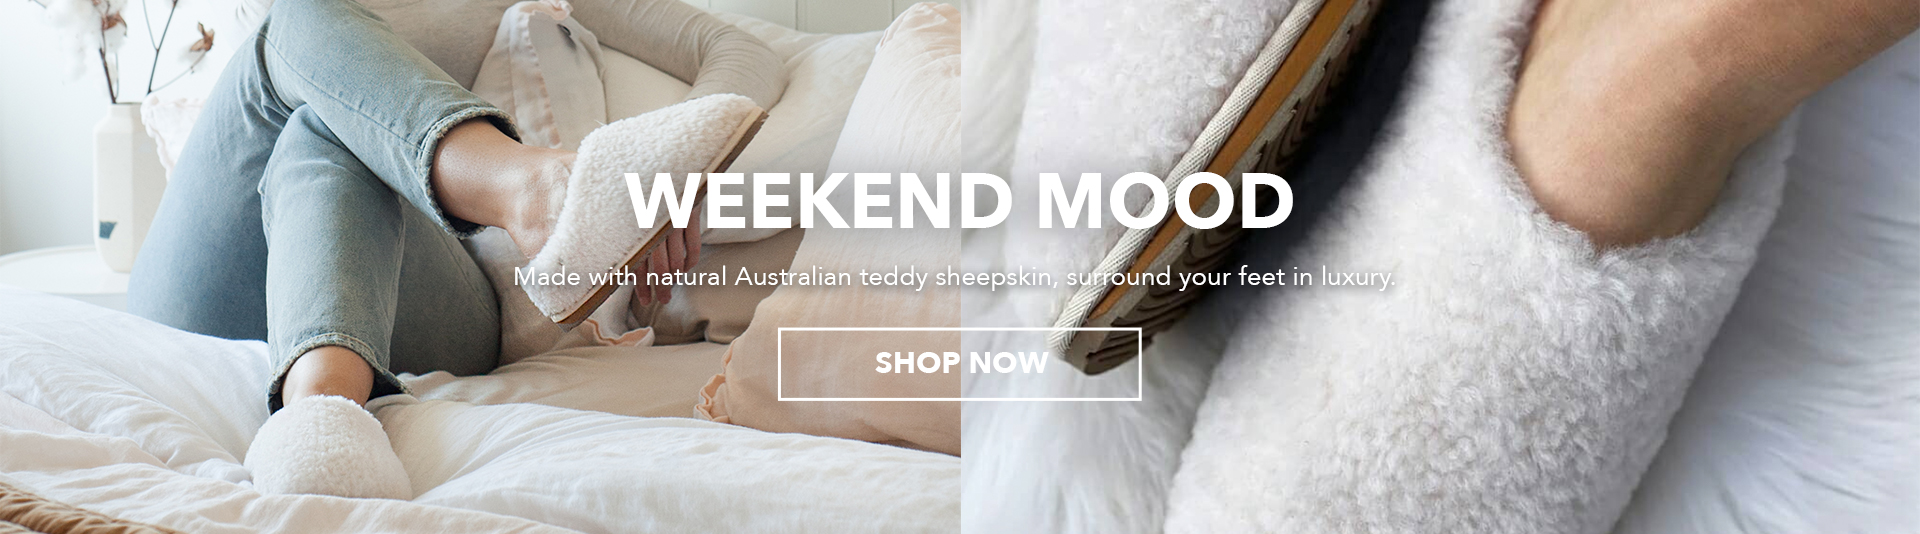 Girl sitting on bed wearing jeans and Joy Teddy sheepskin slippers. Weekend Mood. Made with natural Australian teddy sheepskin, surround your feet in luxury. Shop Now.